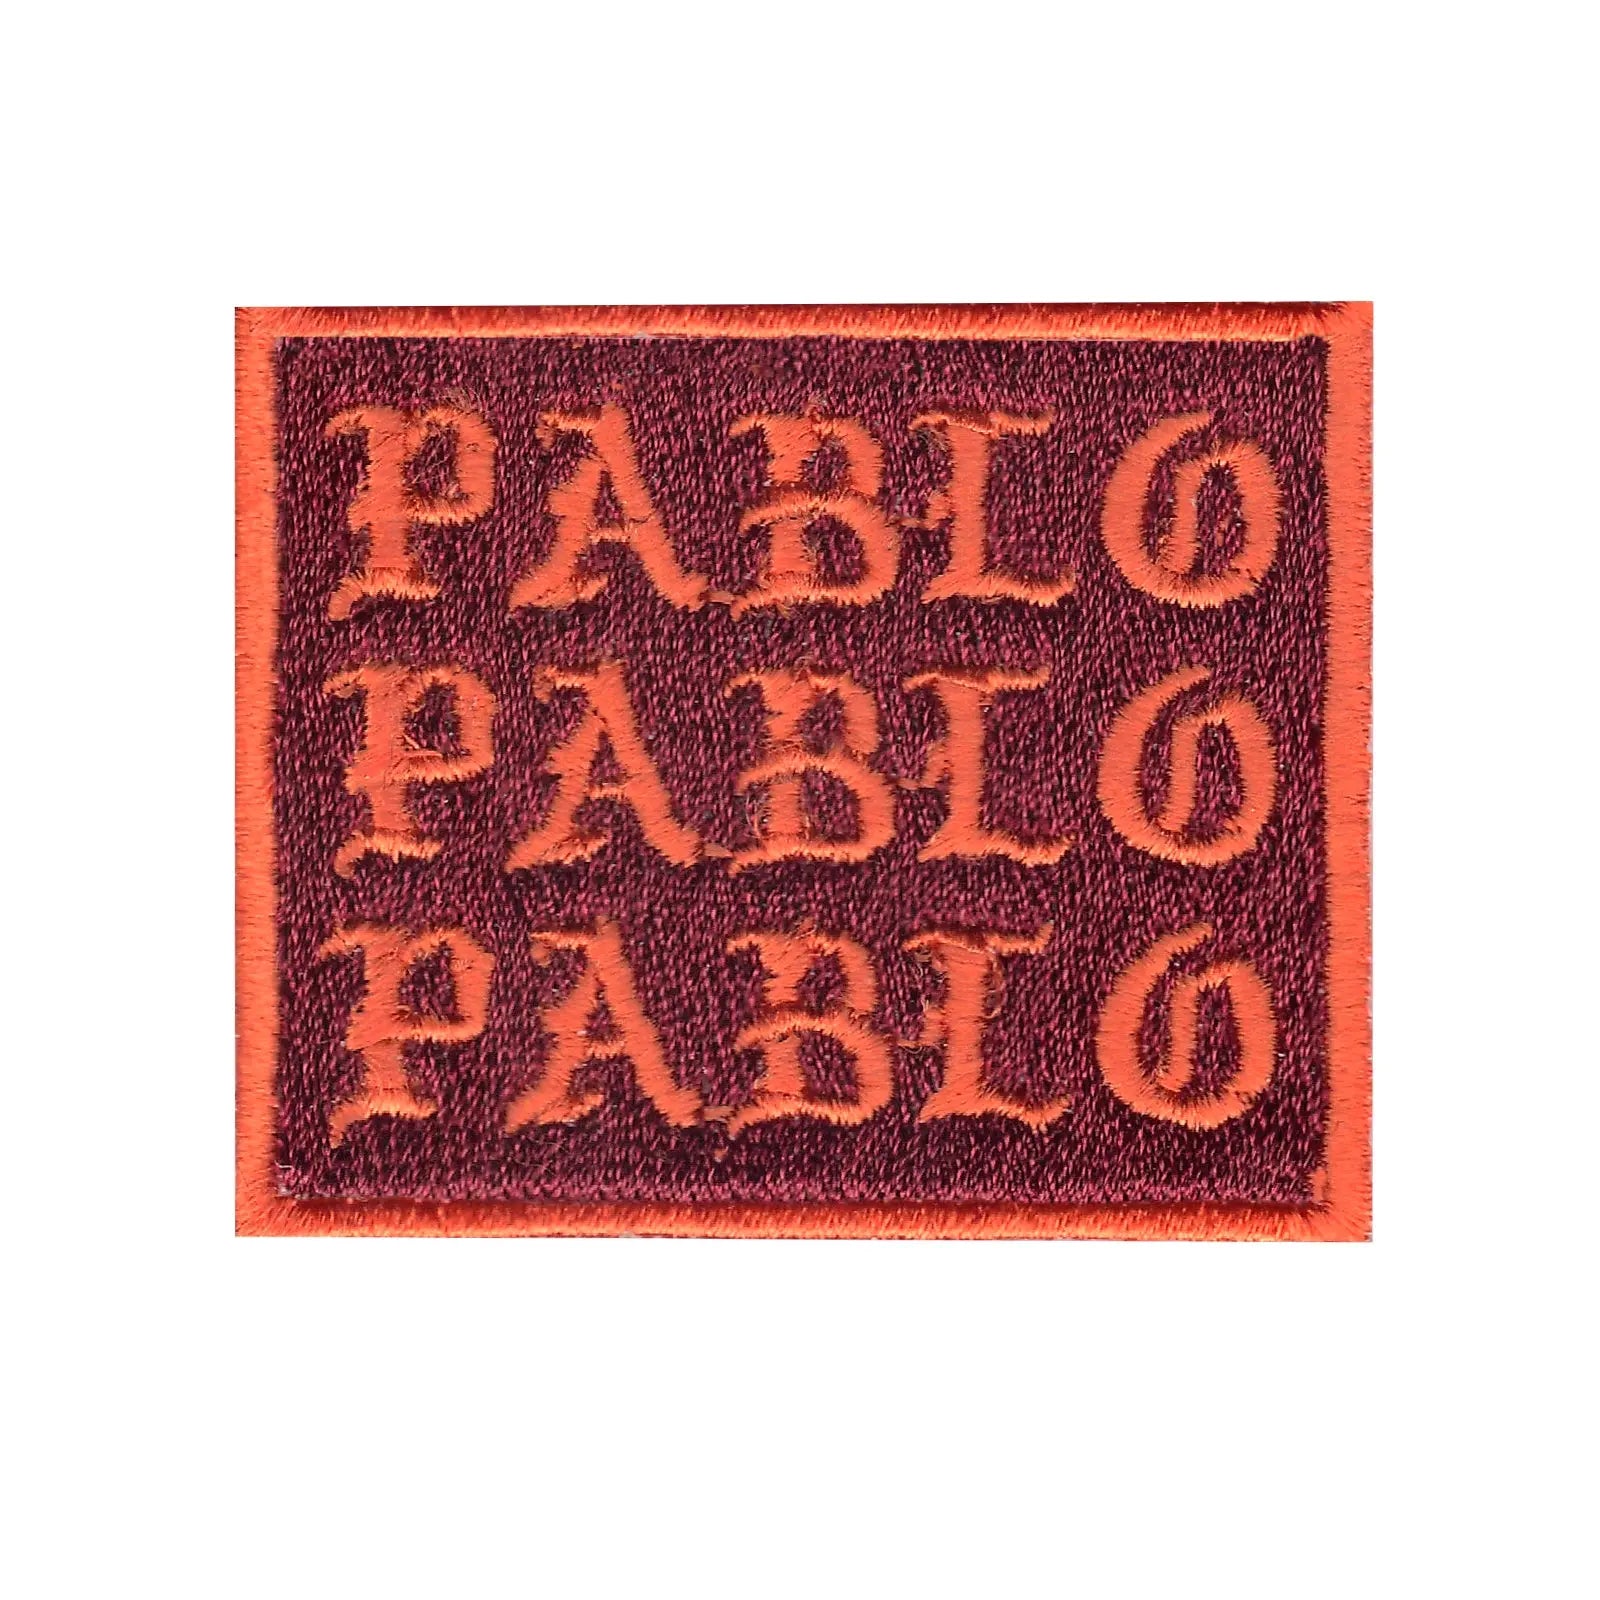 Pablo Embroidered Iron On Patch 